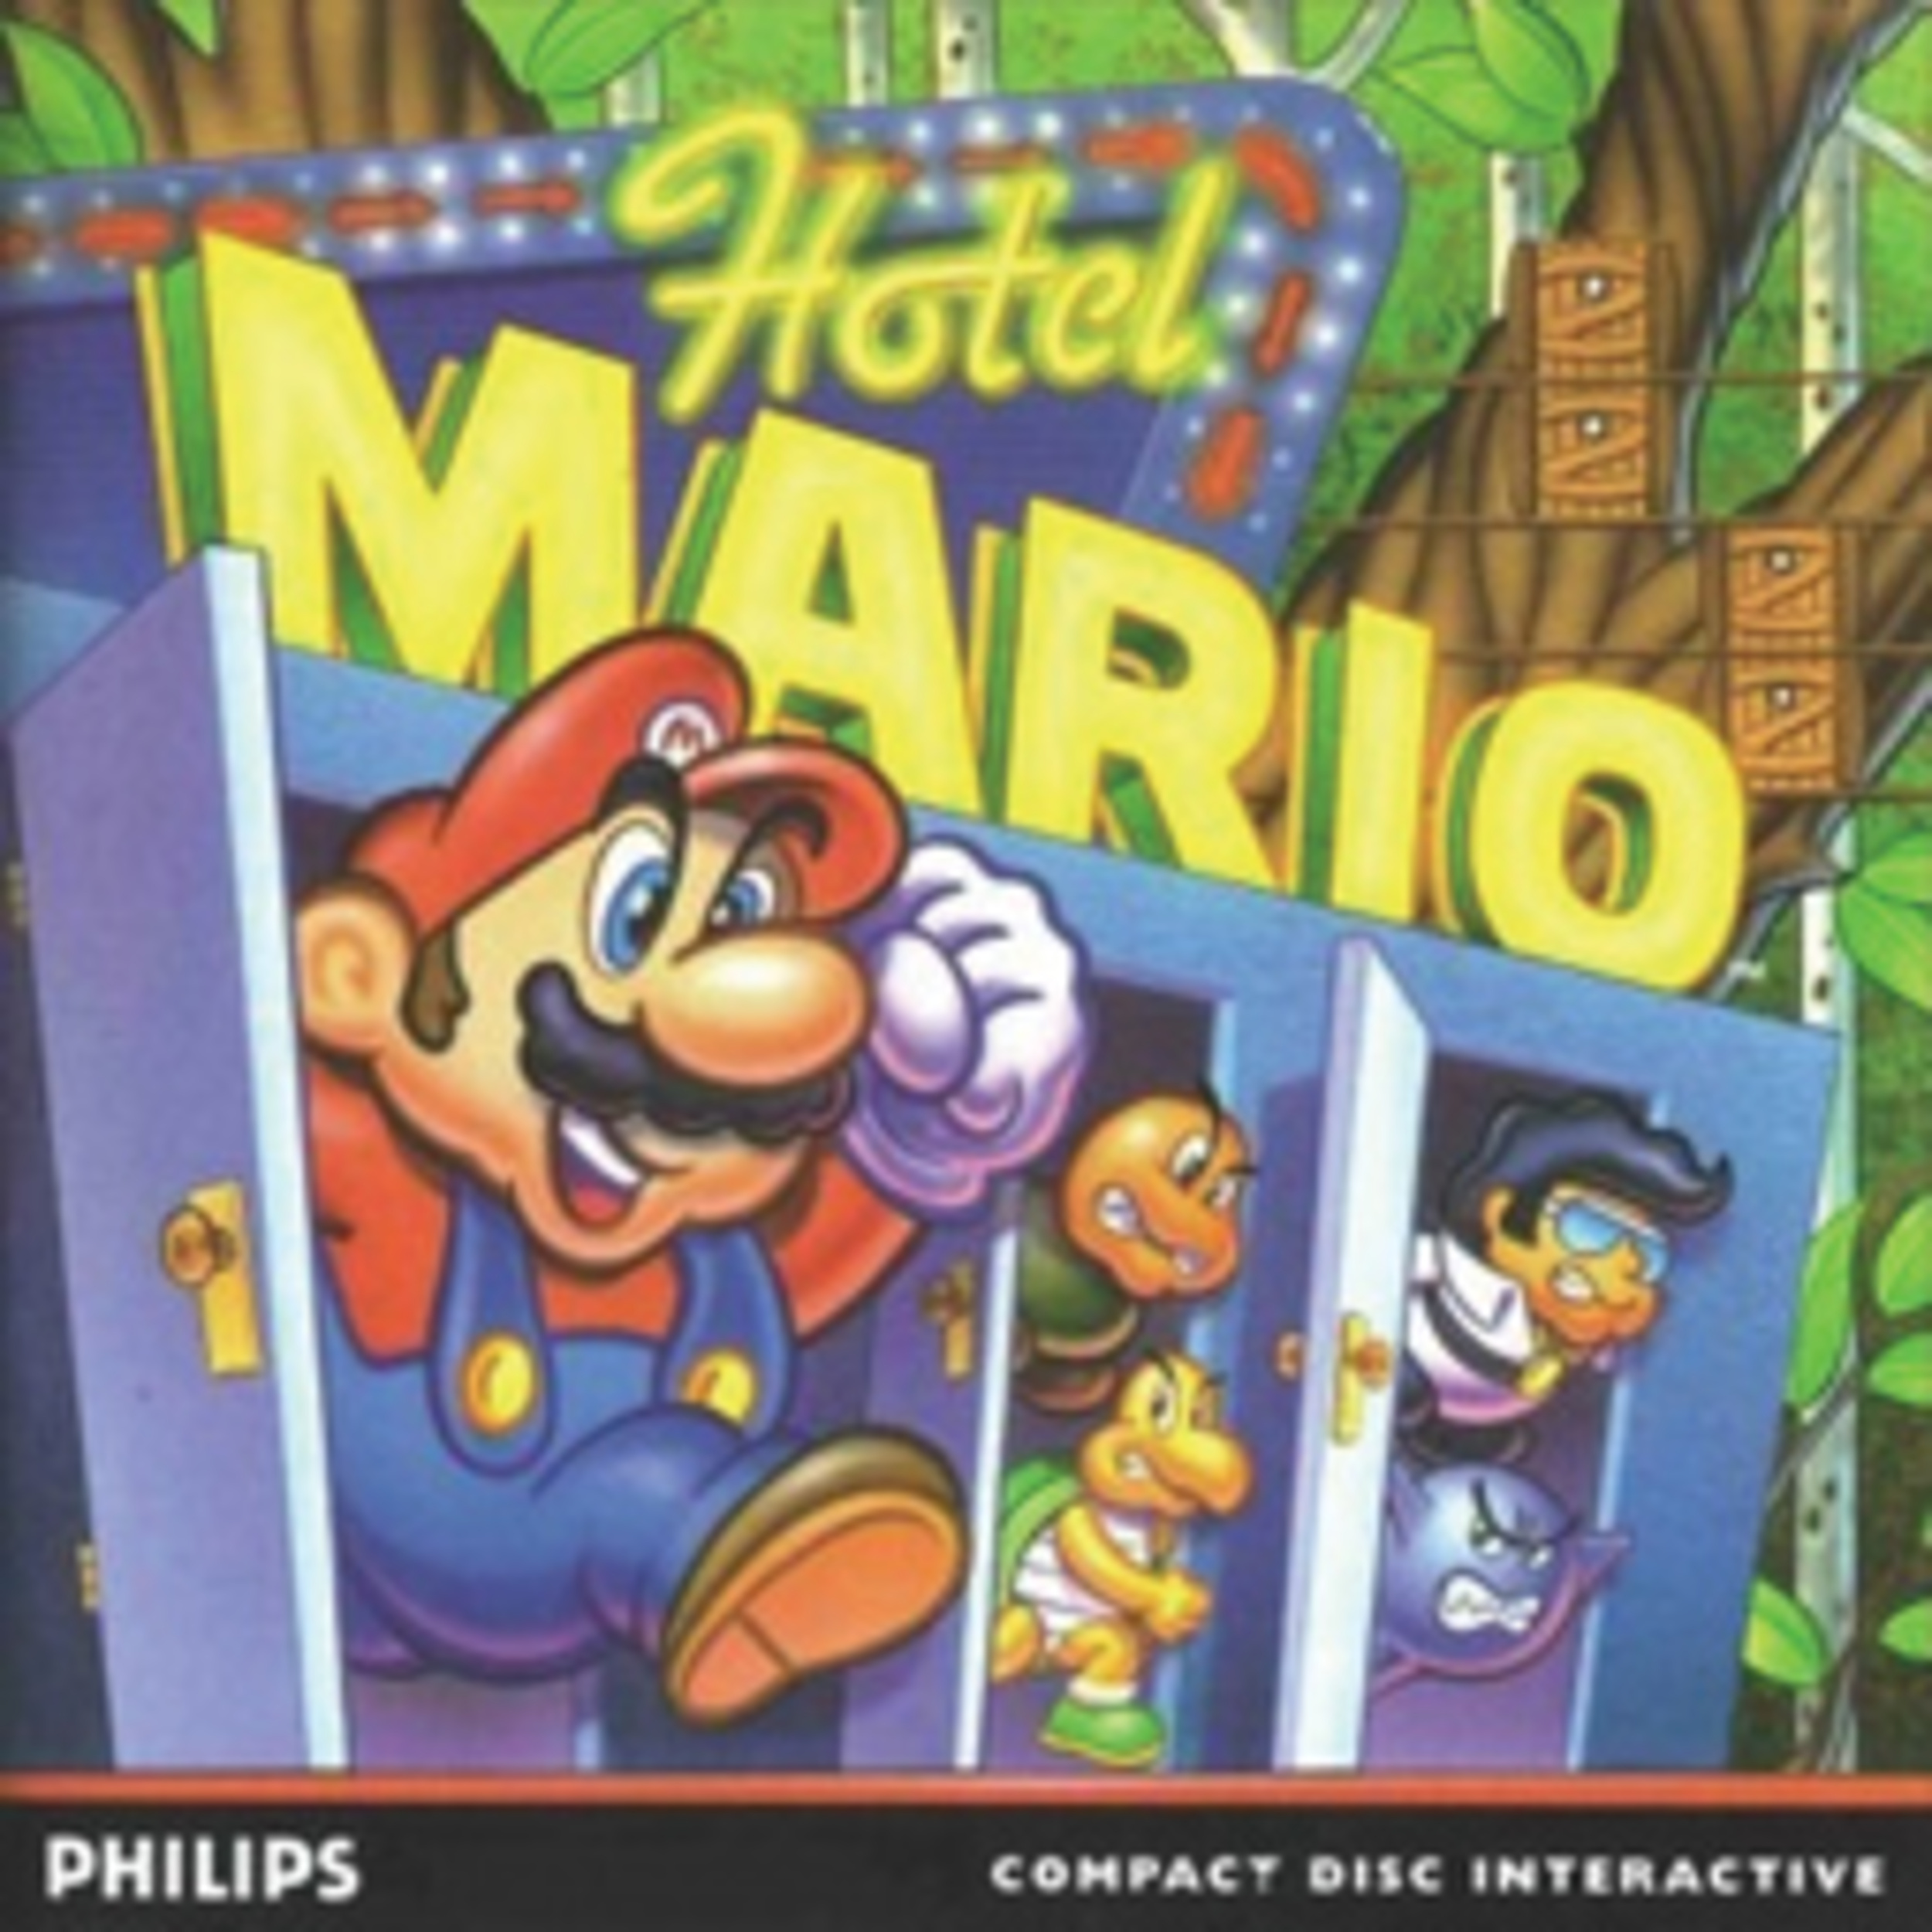 <p>The most horrifying Mario animations live in the CD of this barely played title for Philips' doomed CD-i system.<br><br>For some bizarre reason, Nintendo allowed Philips to obtain a license to make a Mario and Zelda game for its CD system. The game boasted full animations of your favorite plumbers because if there's one thing Mario games needed up until now, it's endless cutscenes you can't skip. The story is even stranger. For some reason, all of Bowser's kids have gone into the hotel business, and Mario closes levels of doors in each hotel as Goombas and Koopa Troopas open them. That's it. That's the whole game. <em>Hotel Mario</em> turns one of gaming's most beloved experiences into a part-time job. </p><p><a href='https://www.msn.com/en-us/community/channel/vid-cj9pqbr0vn9in2b6ddcd8sfgpfq6x6utp44fssrv6mc2gtybw0us'>Follow us on MSN to see more of our exclusive entertainment content.</a></p>